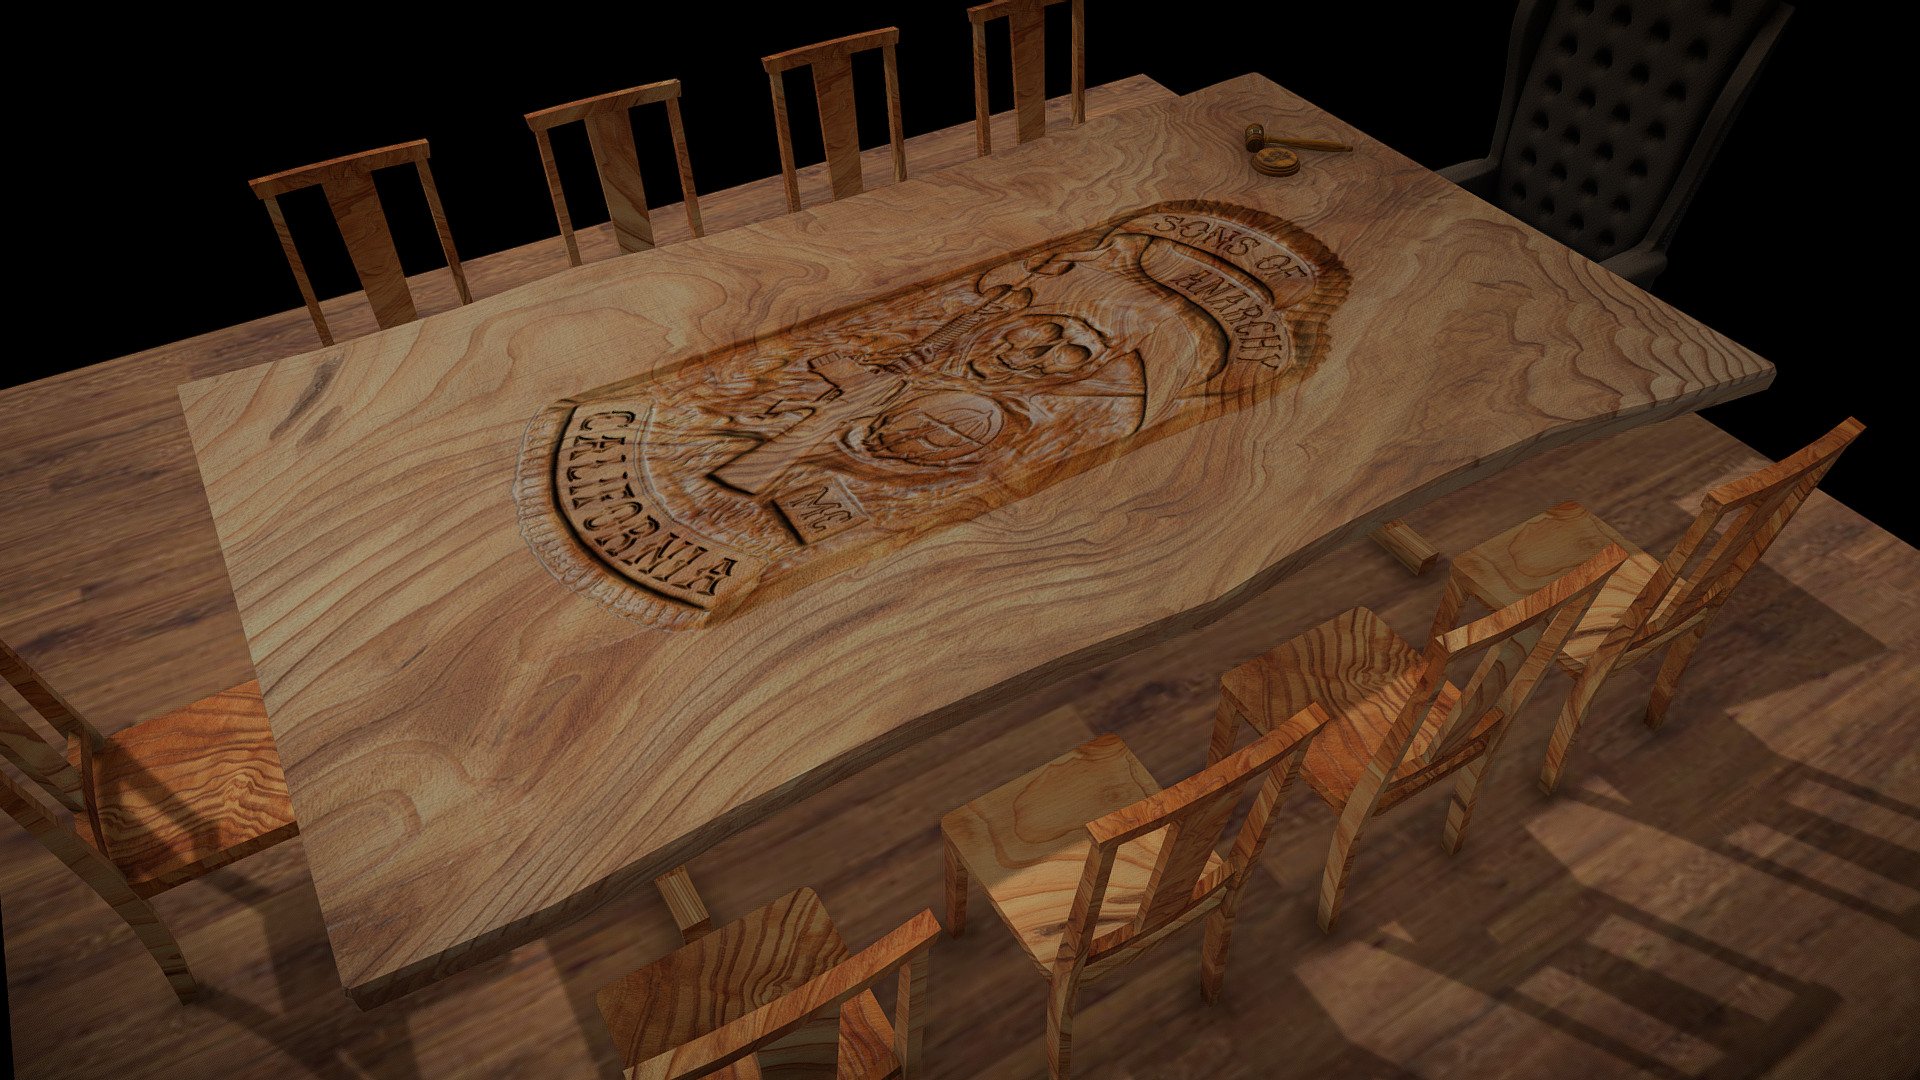 The Table from Sons of Anarchy 
modeled in Maya 2016
Textures in Photoshop 

&ldquo;Home is where the Reaper is